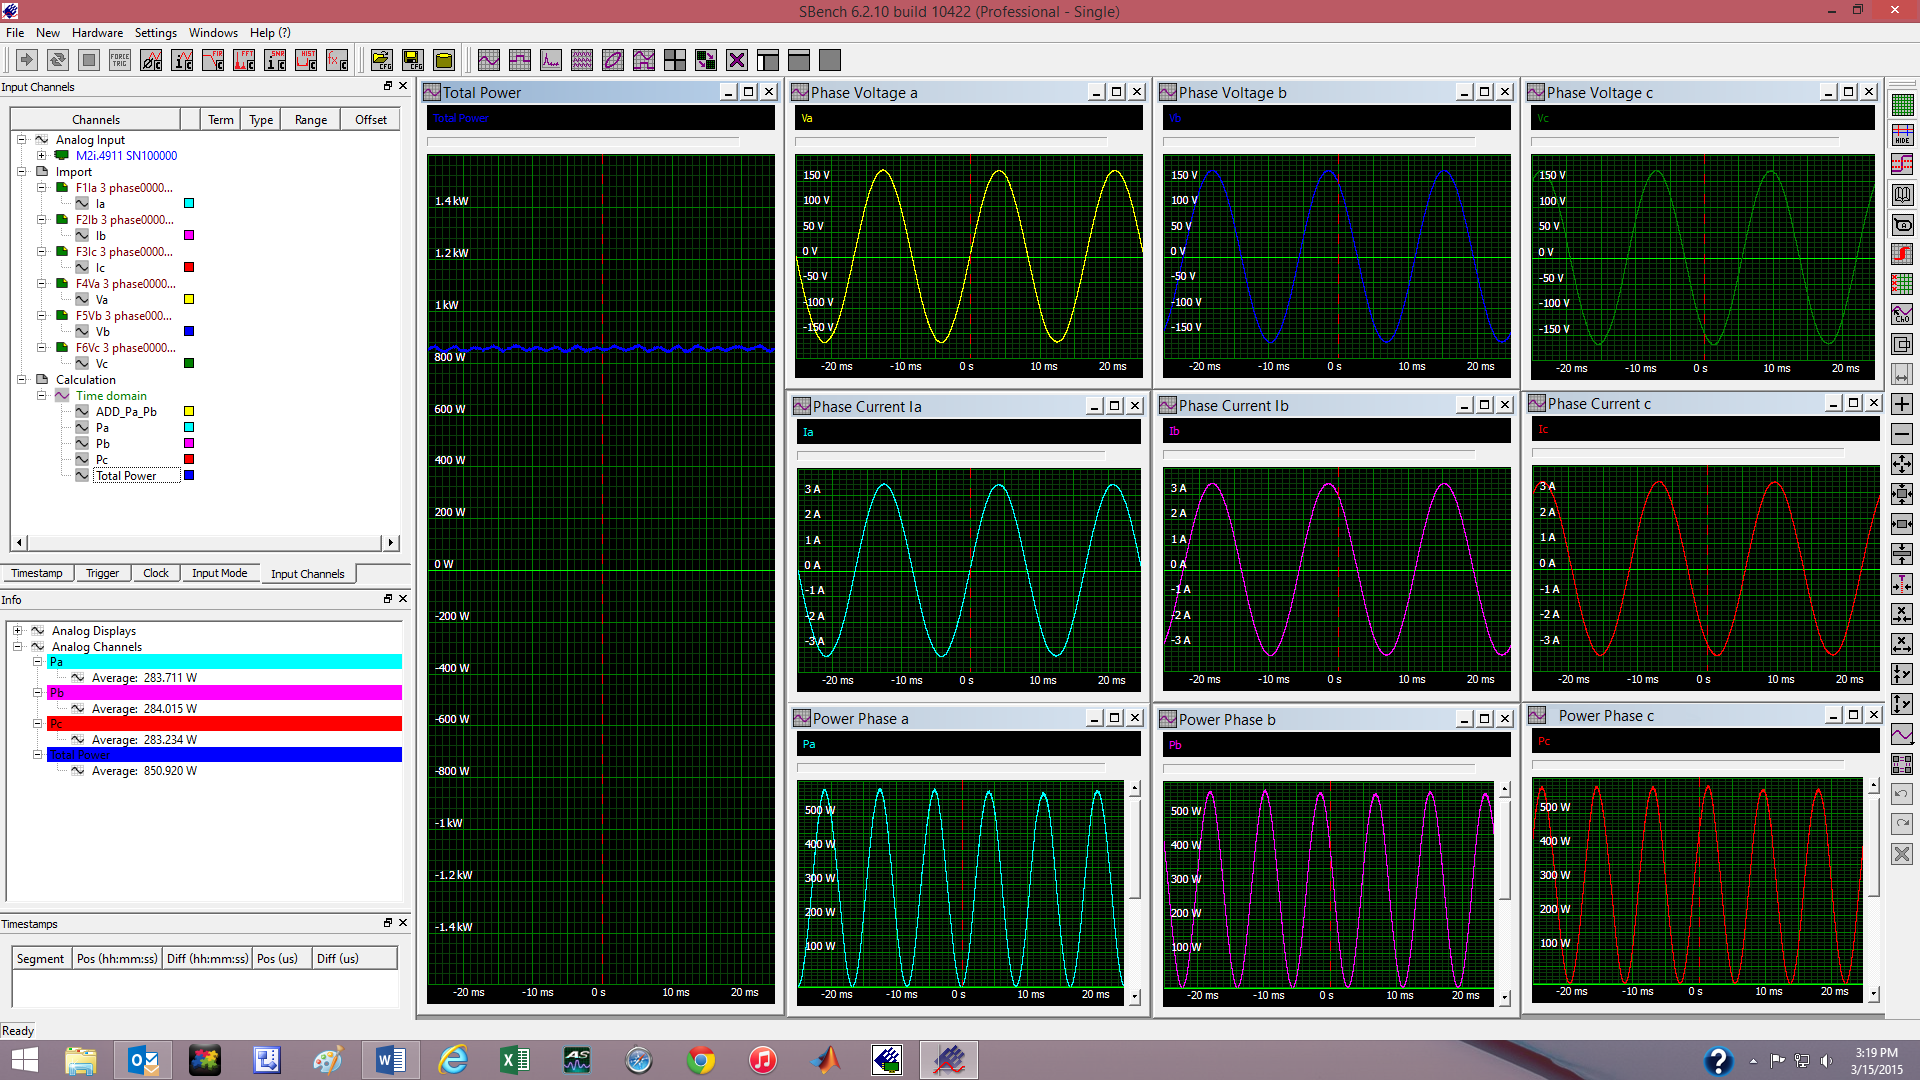 Sbench 6 Screenshot of a phase power measurement